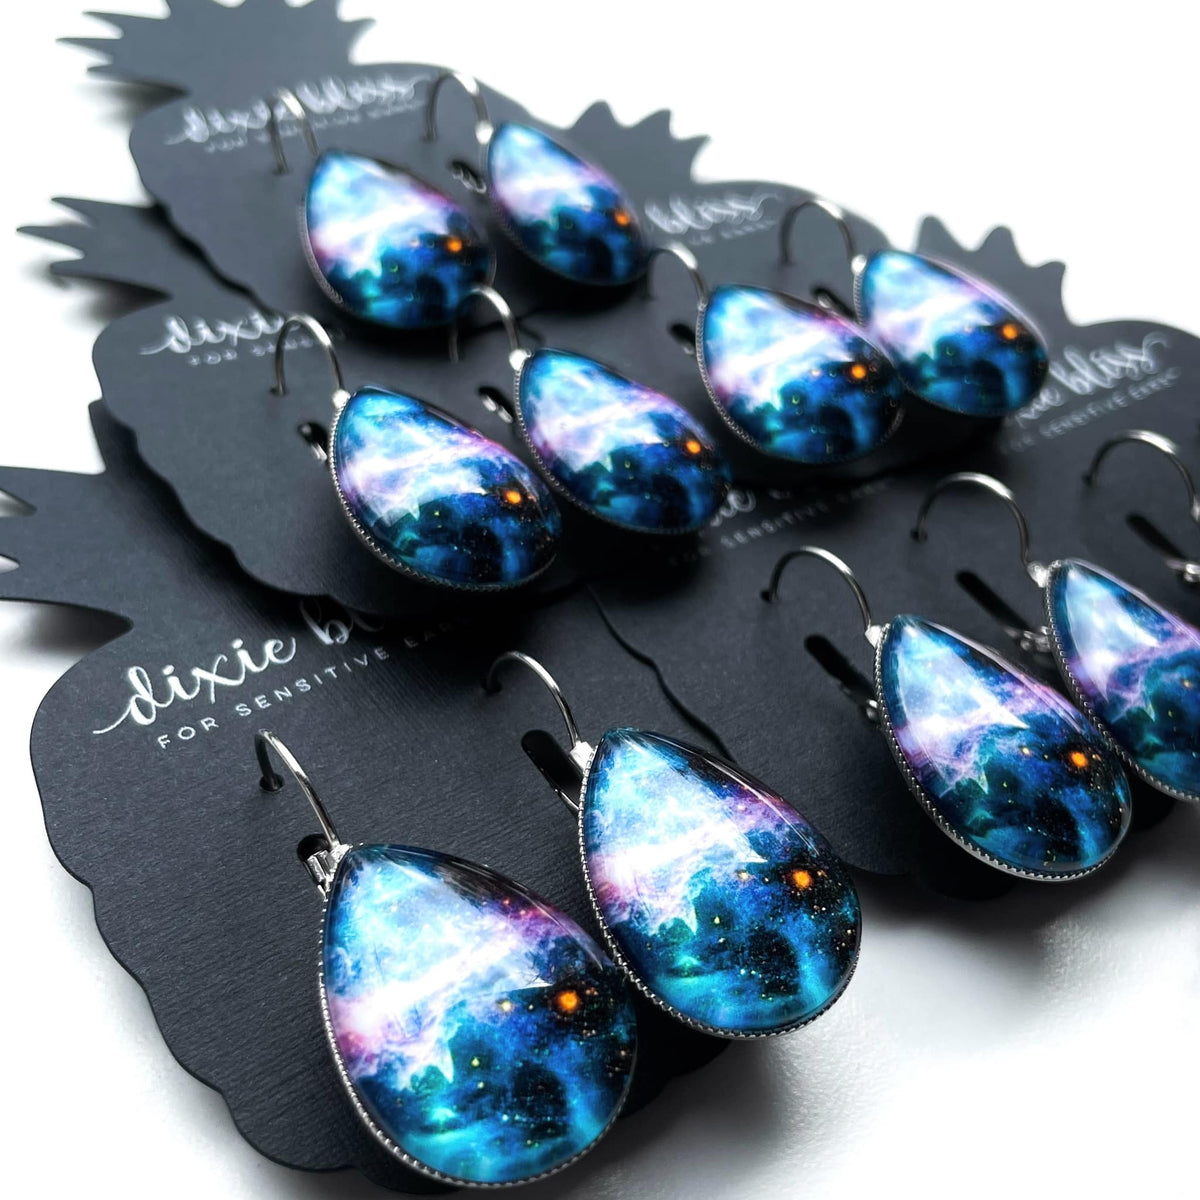 Dixie Bliss Earrings: Galaxy Space Galactic Lever Backs Hypoallergenic made in the USA woman-owned company; safe & made for sensitive ears